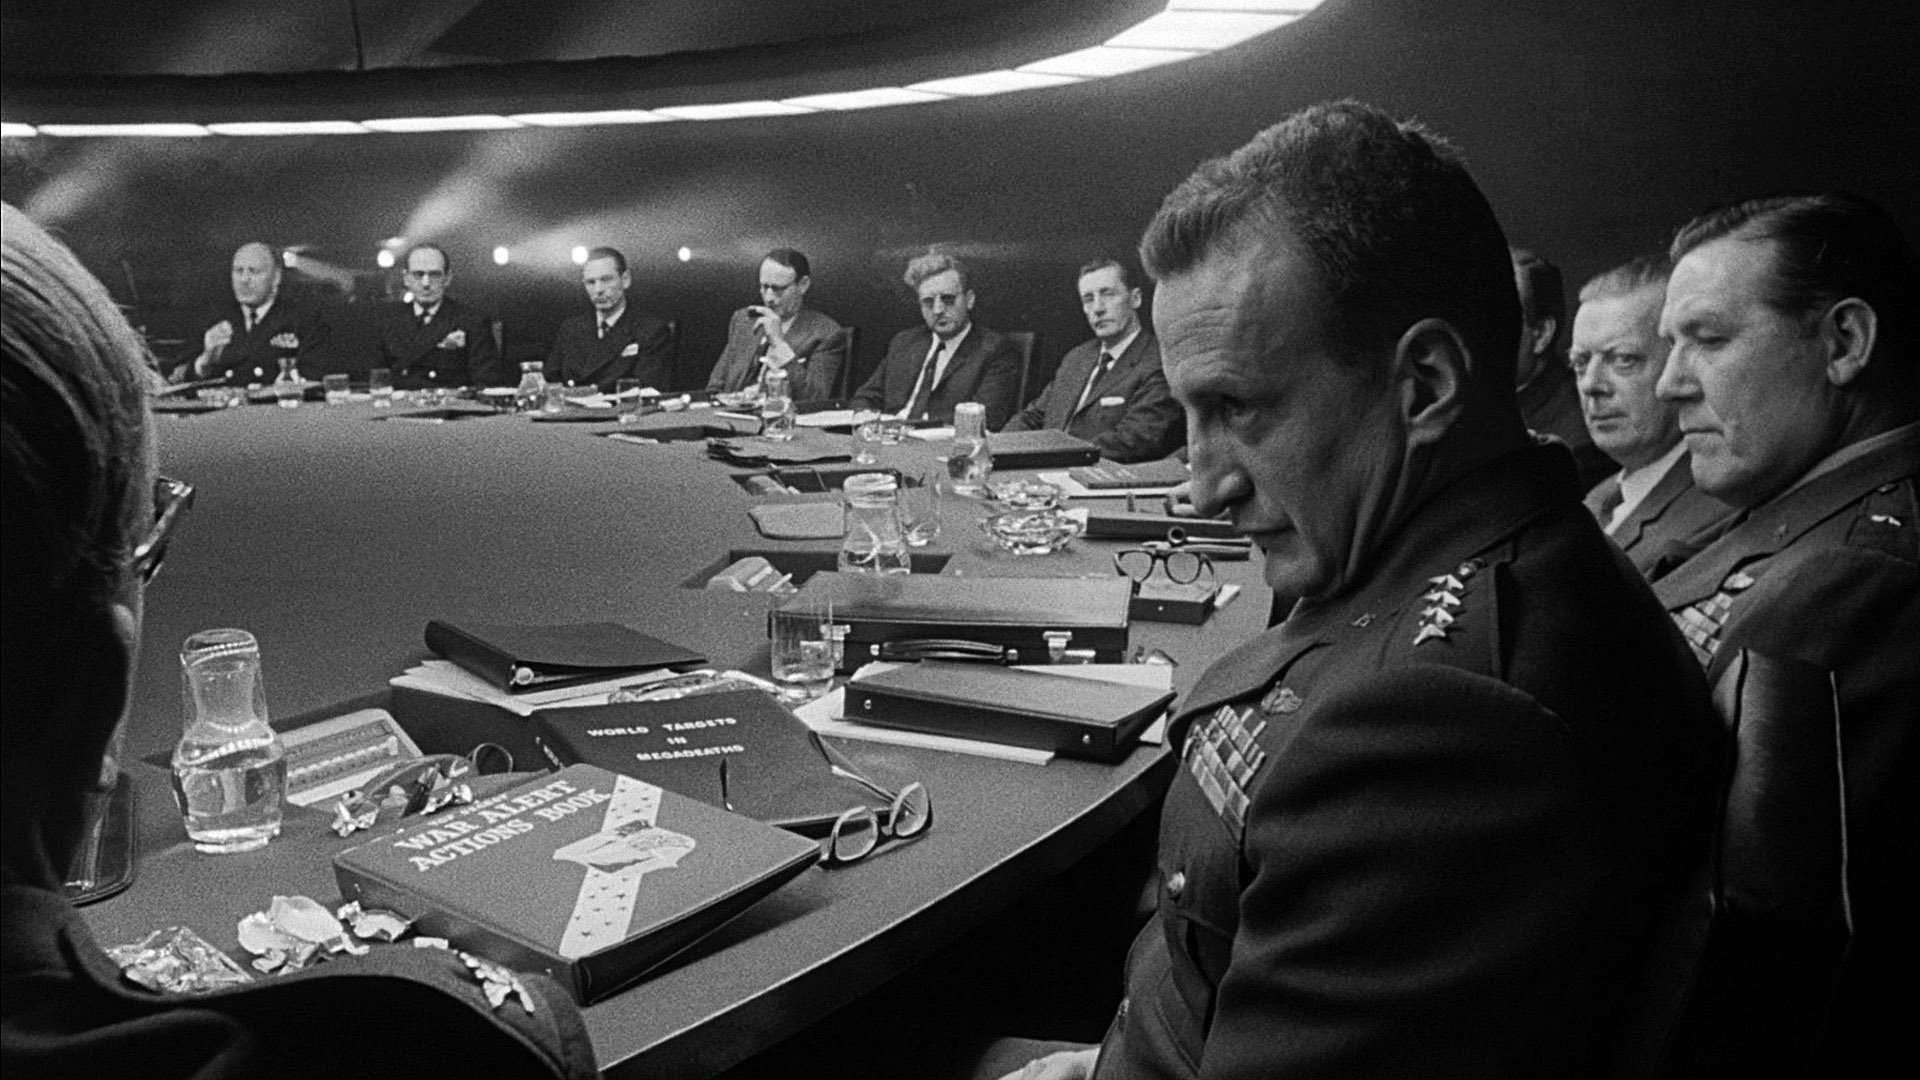 Dr Strangelove or How I Learned to S 4K Worrying and Love the Bomb